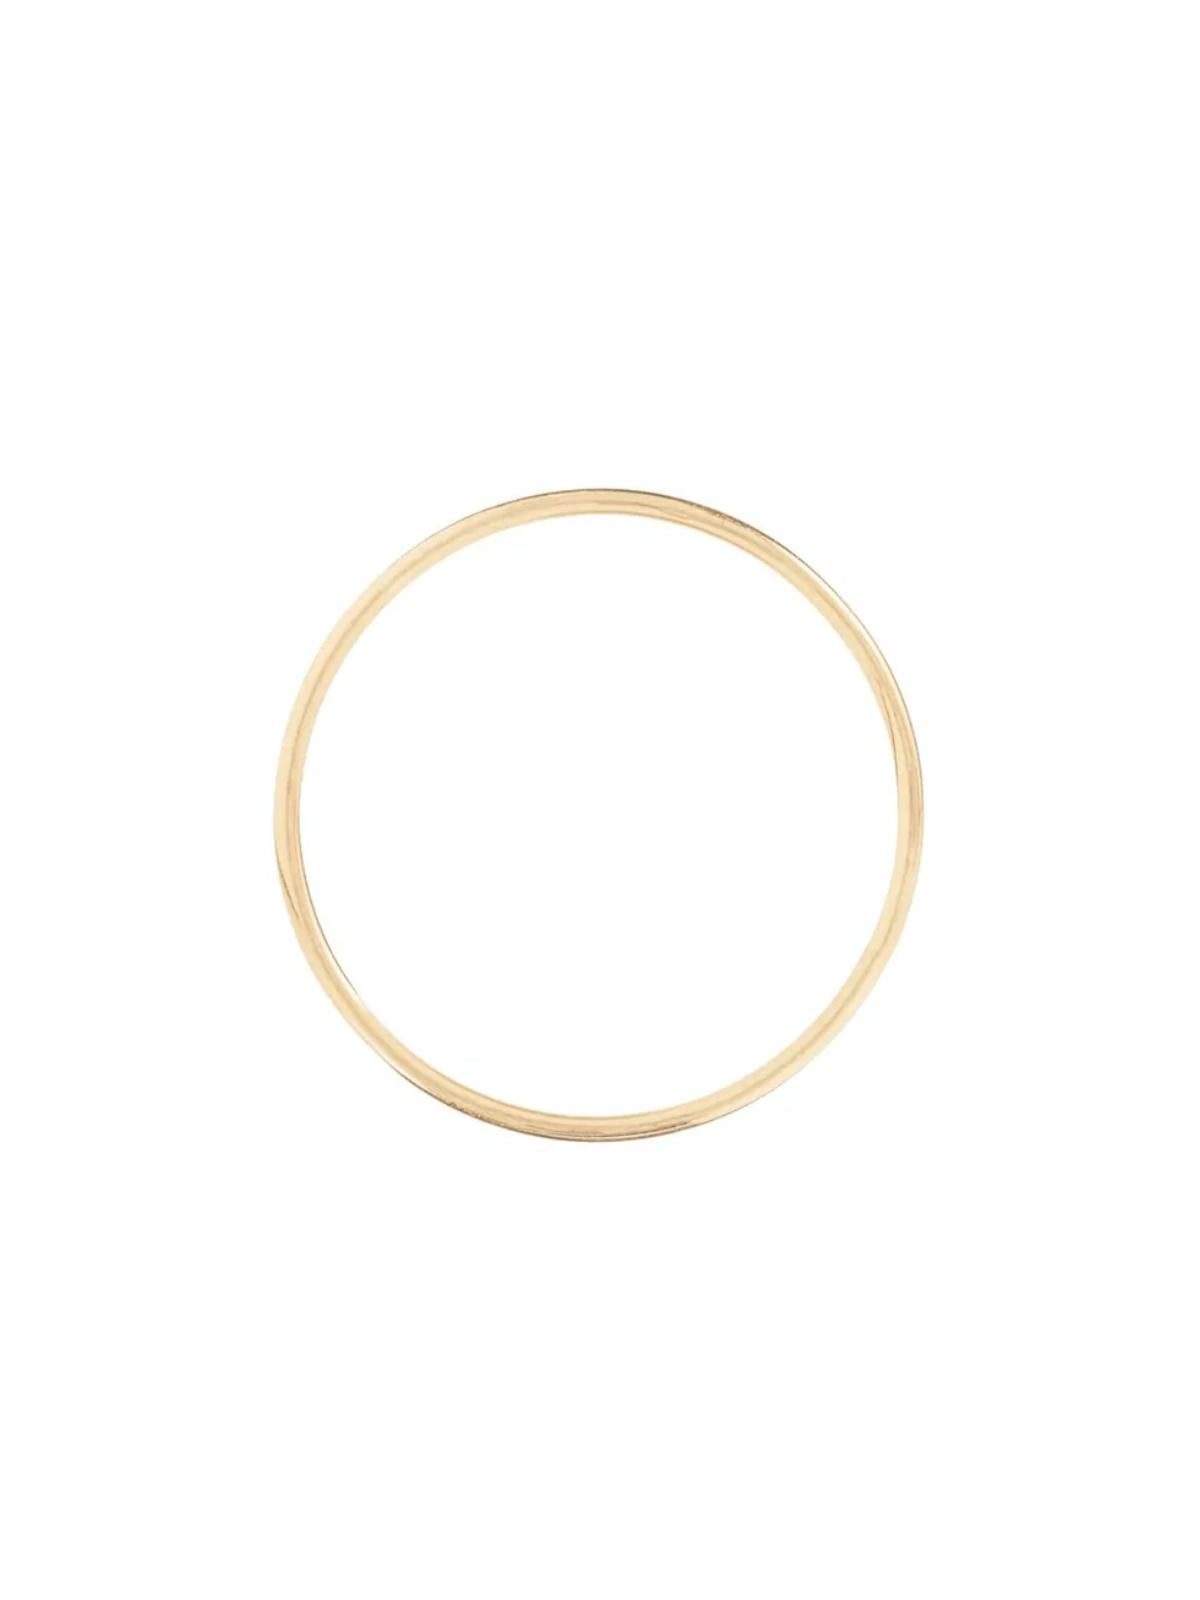 By Charlotte | 14K Gold Sweet Purity Ring | Perlu